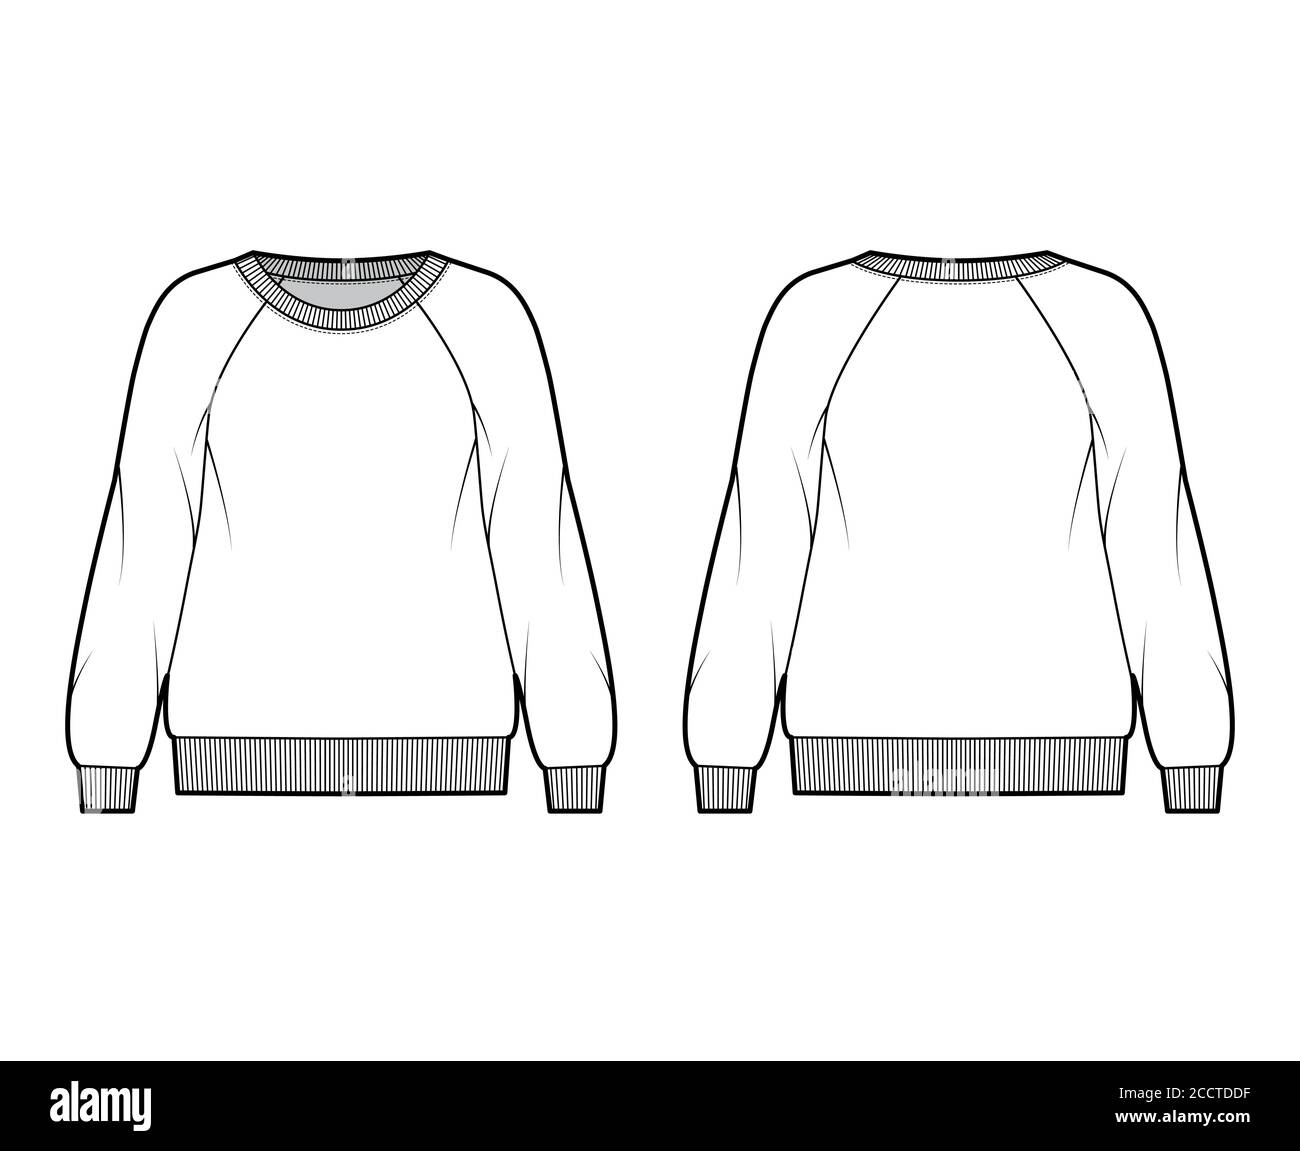 Oversized cotton-terry sweatshirt technical fashion illustration with scoop neckline, long raglan sleeves, ribbed trims. Flat jumper apparel template front back white color. Women, men unisex top CAD Stock Vector